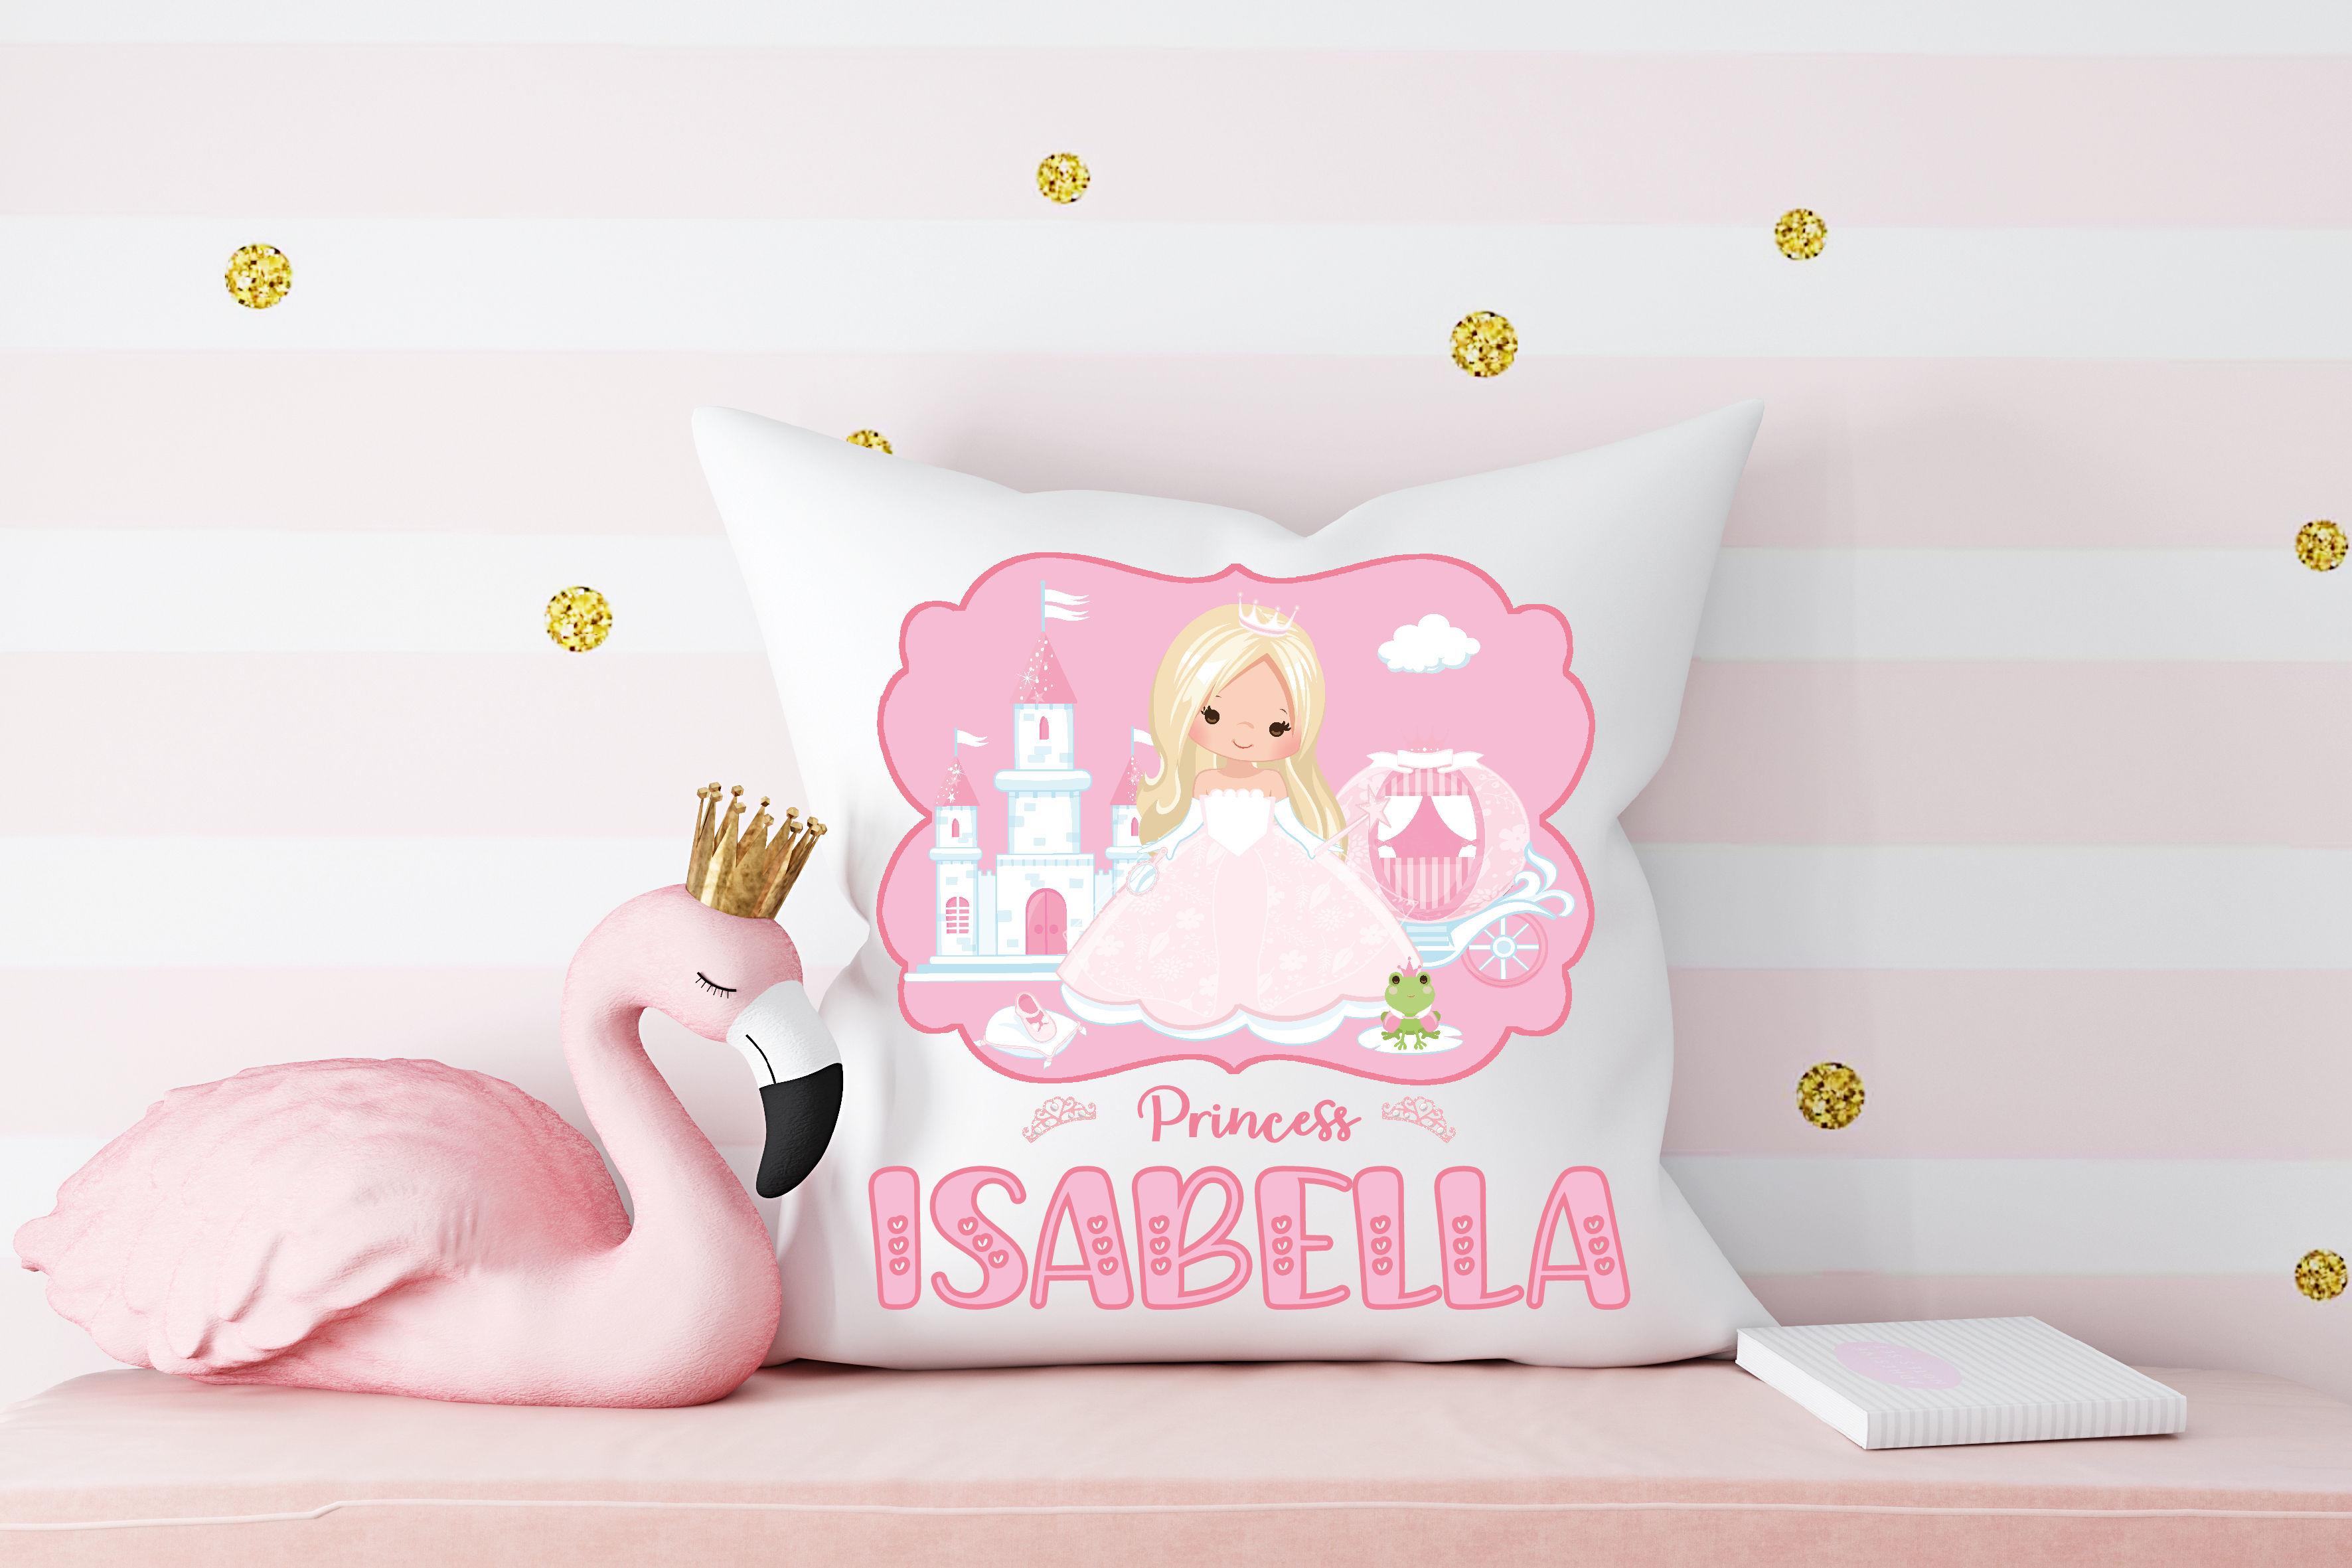 Princess Cushion Personalised Gift For Girl,Pink Bedroom,Girls Bedrrom Accessory.Blonde or Dark Hair